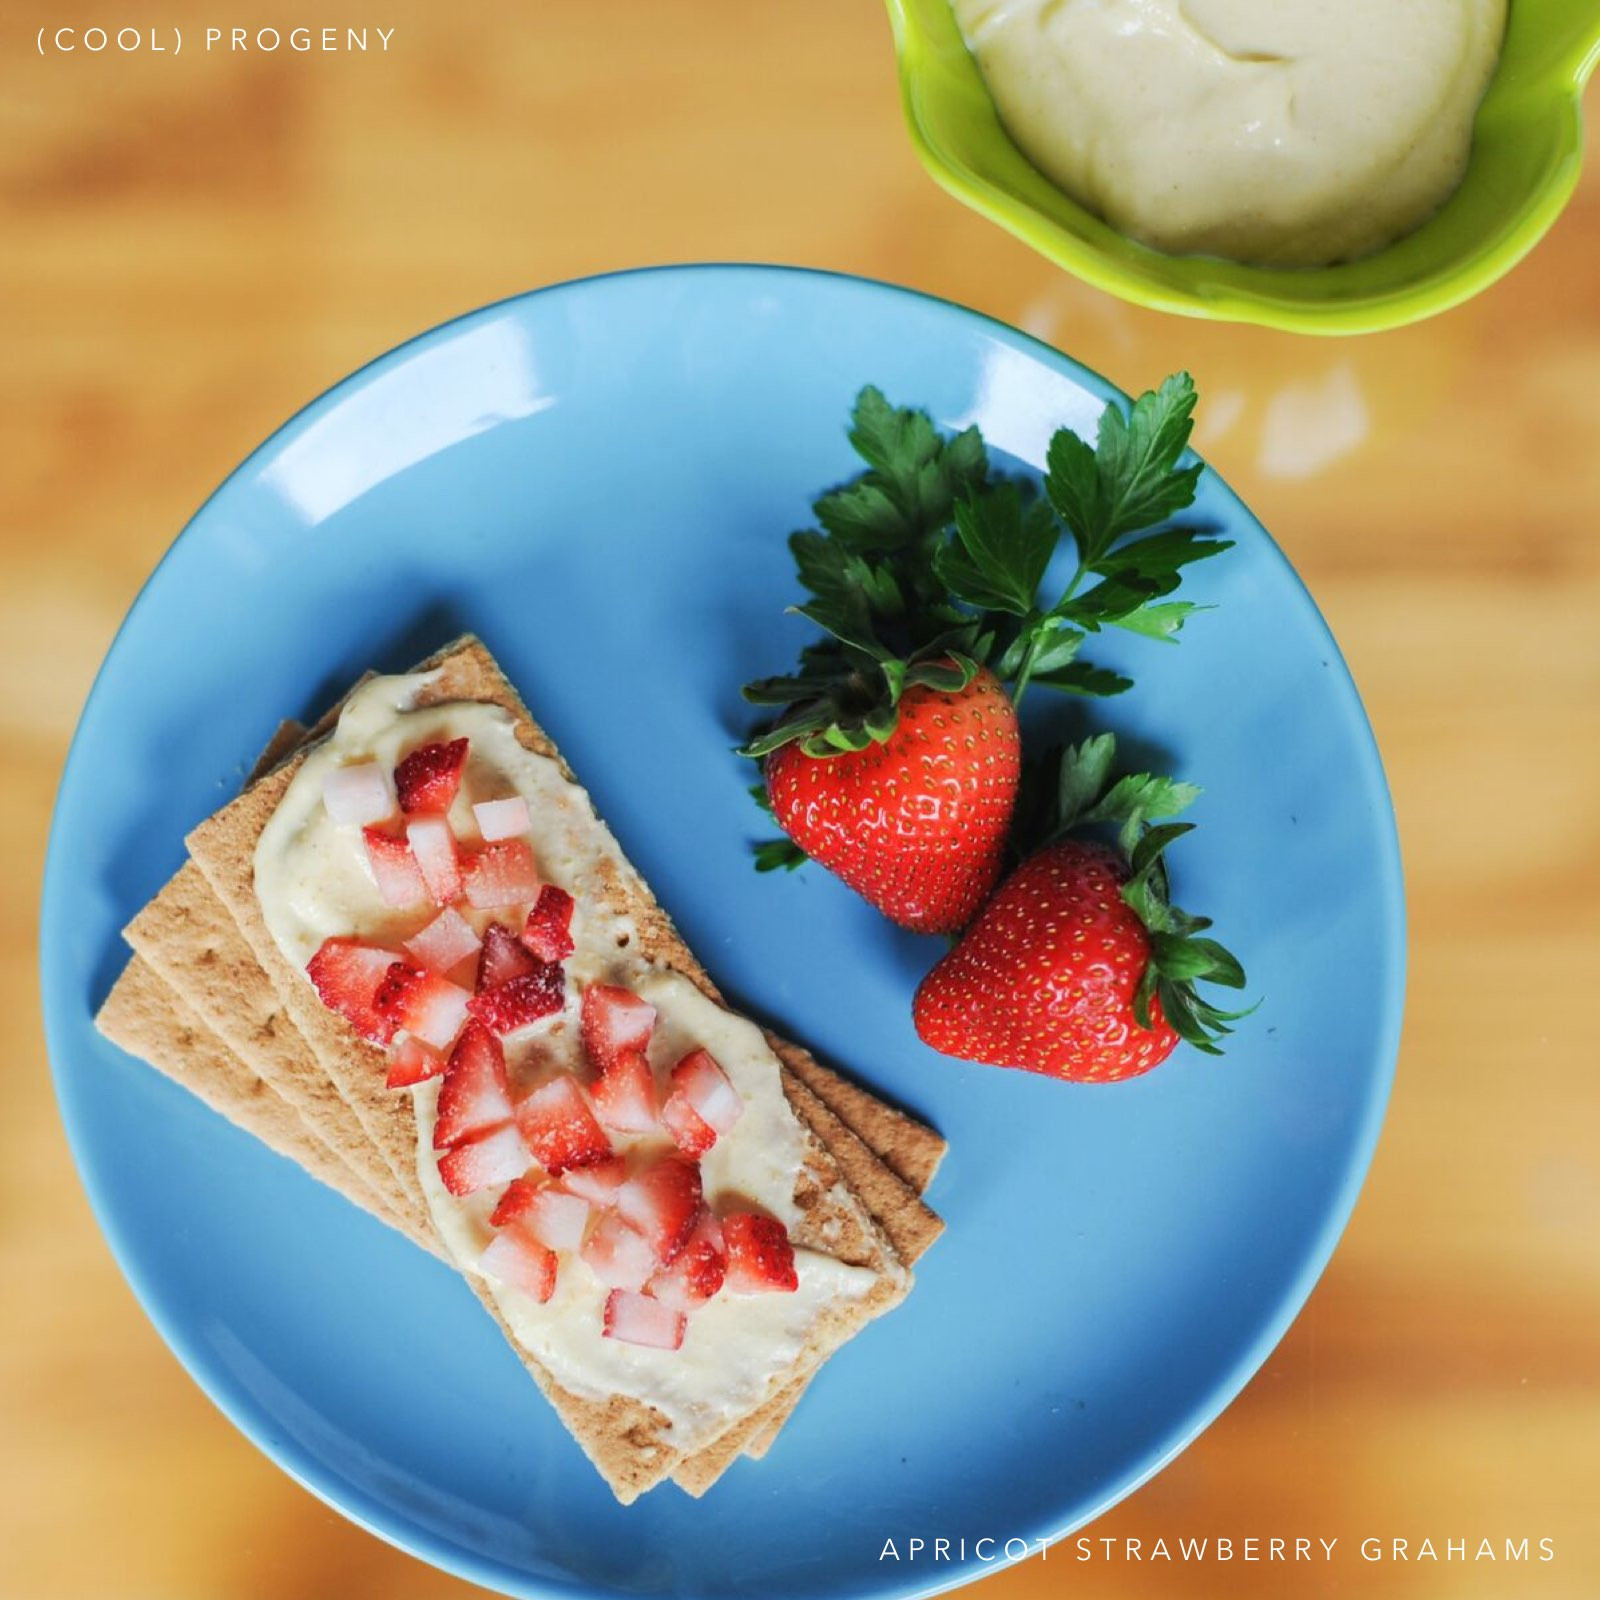 Healthy Snacks for Kids Lovely Five Healthy Summer Snacks for Kids Cool Progeny